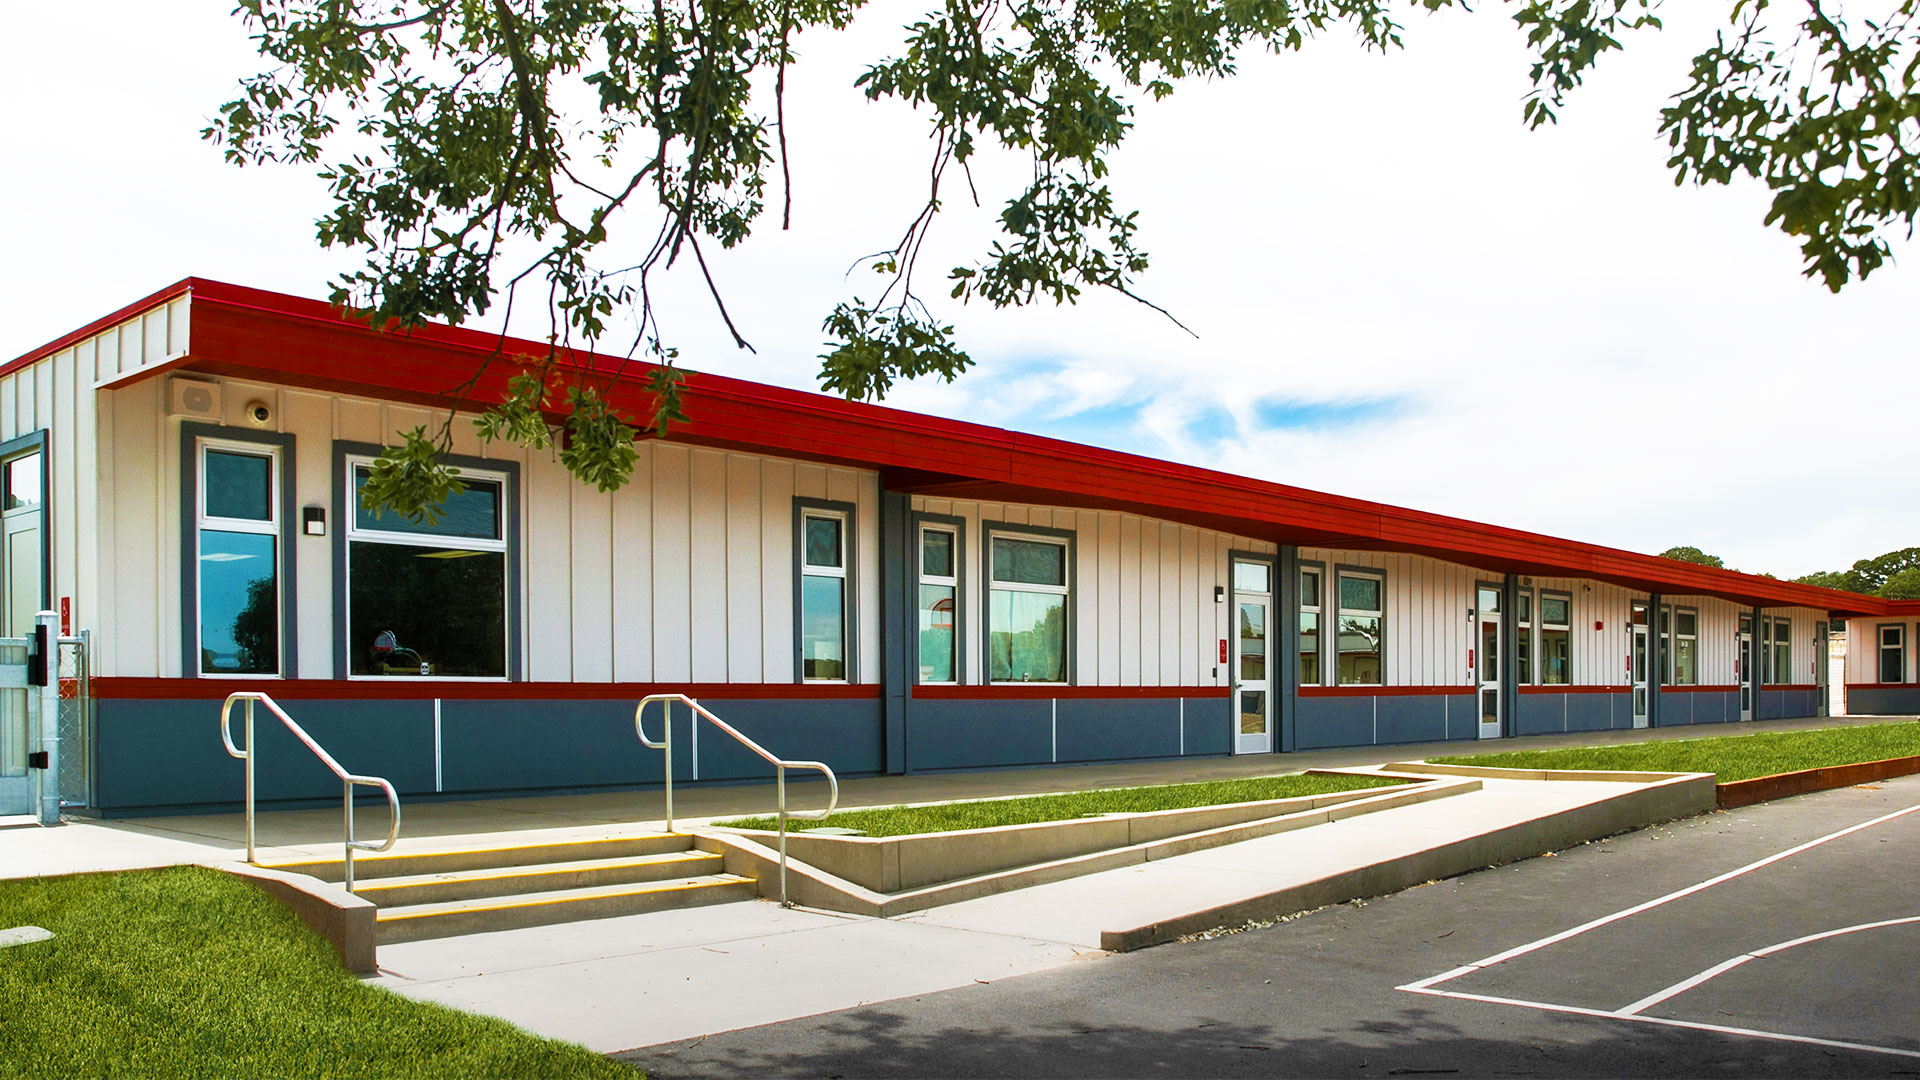 Portable classroom wing with white panel walls and gray wainscot, with concrete walkway and grass.